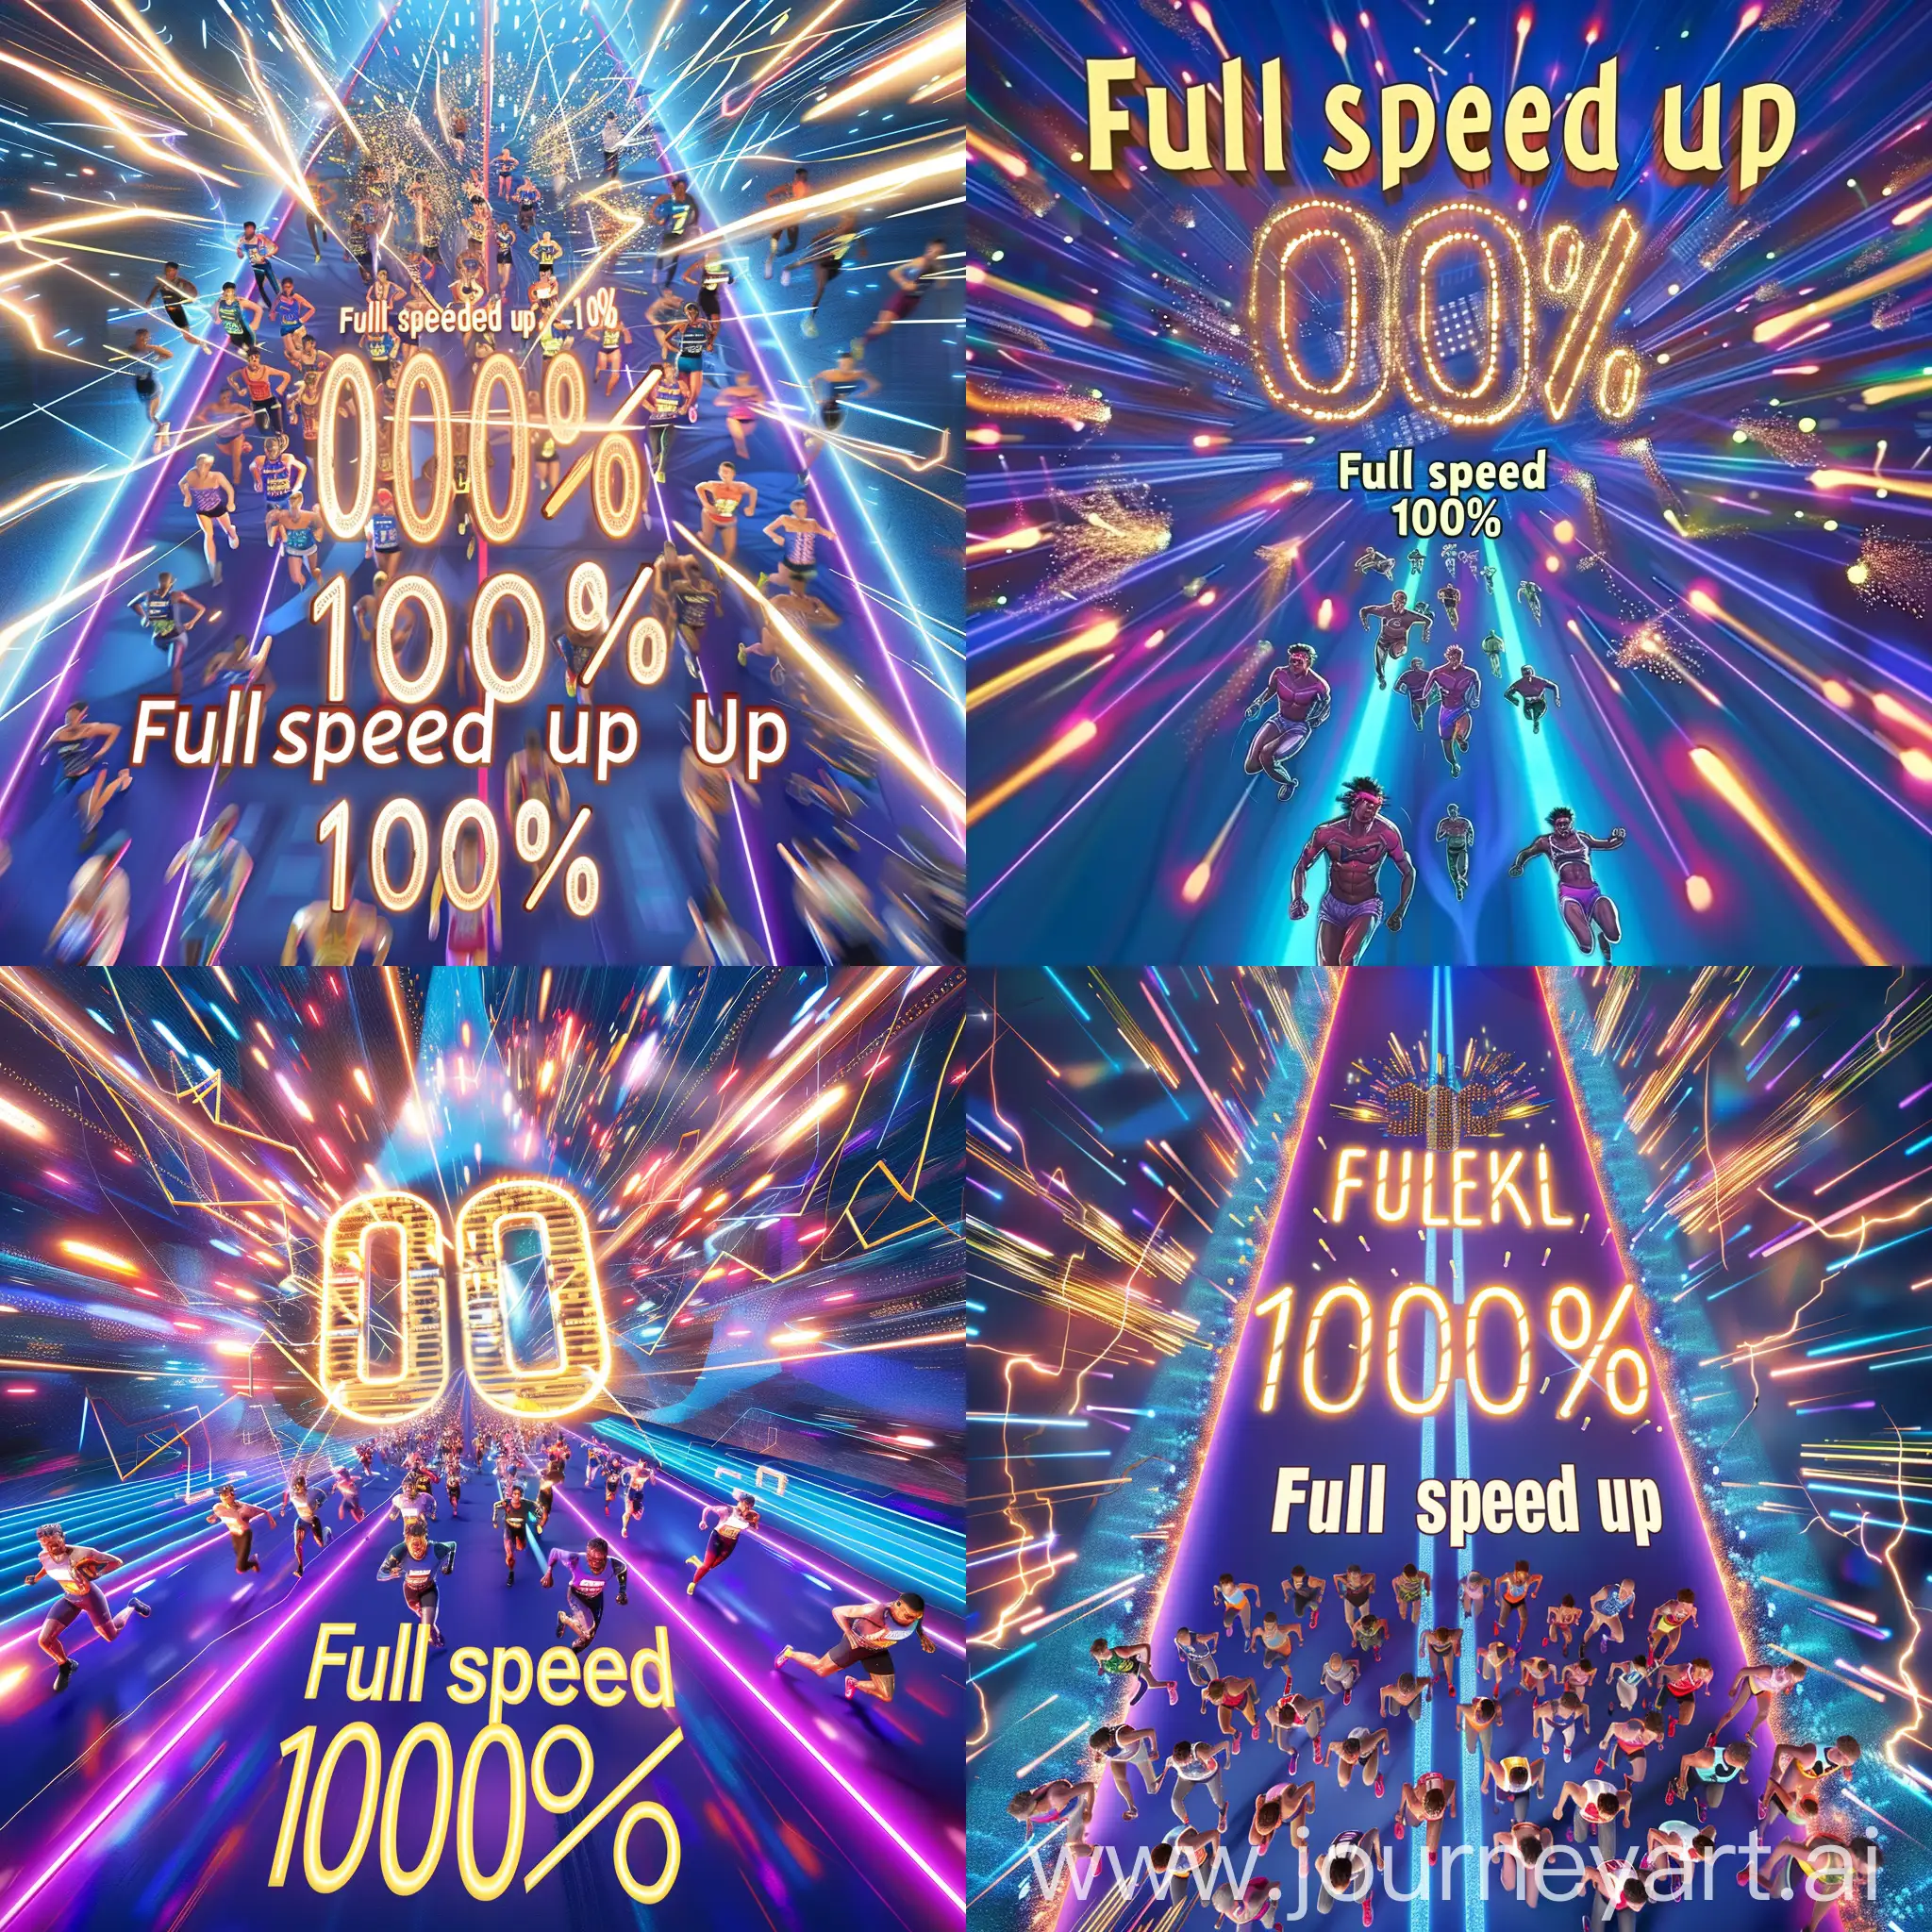 Energetic-Runners-Sprinting-Under-Glowing-Full-Speed-Up-100-Neon-Sign